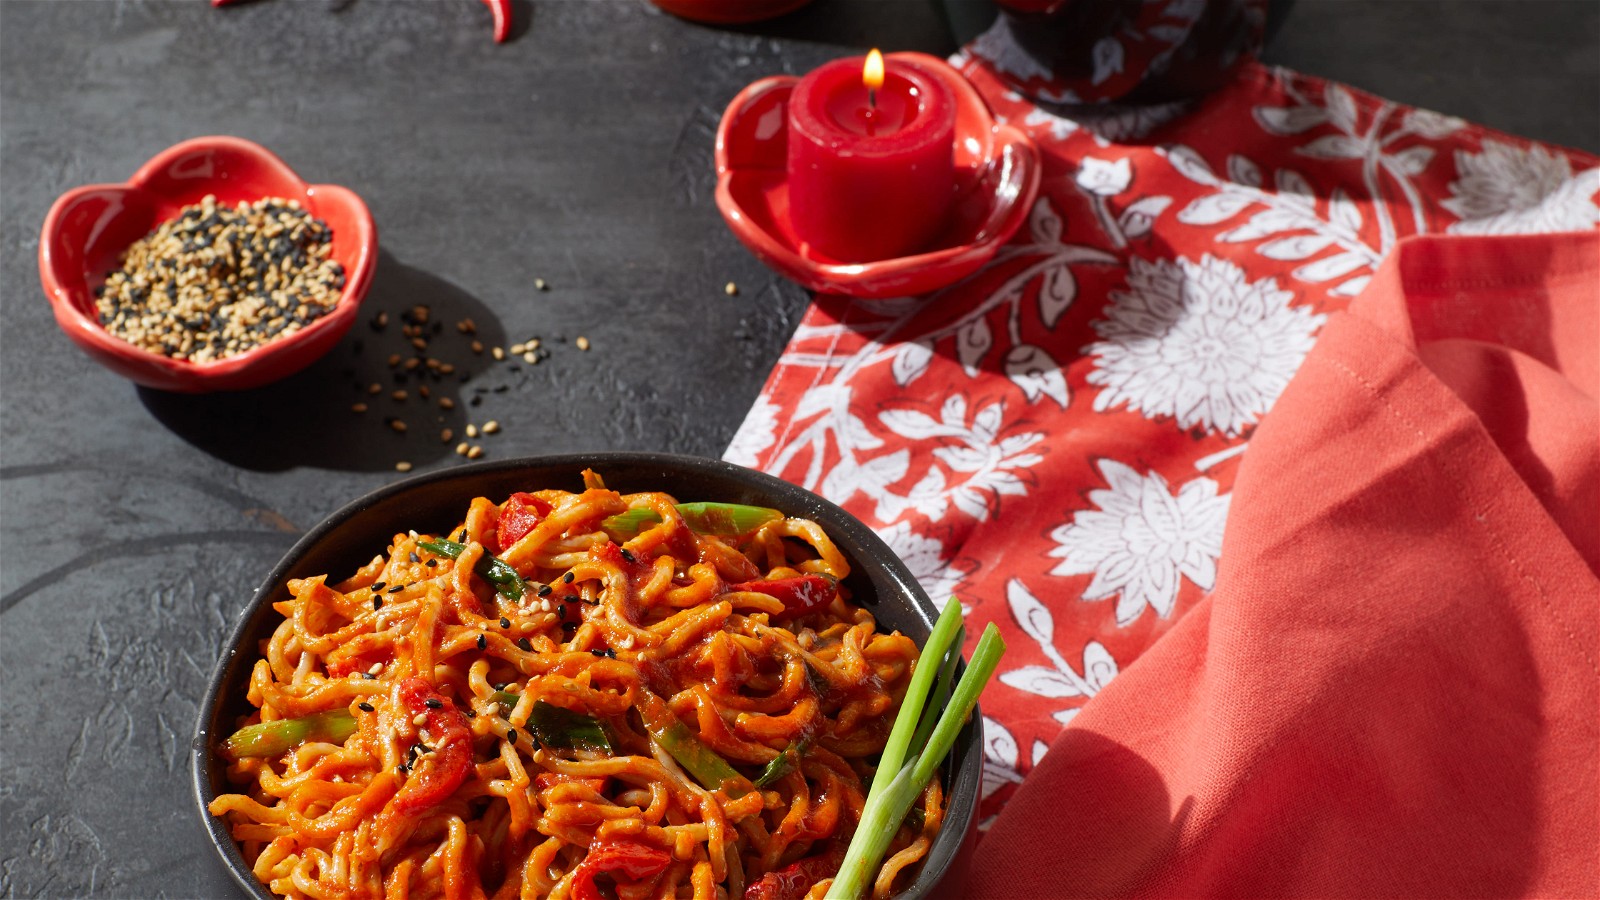 Image of Spicy Dragon Pepper Noodles with Sriracha Sauce and Soba Noodles